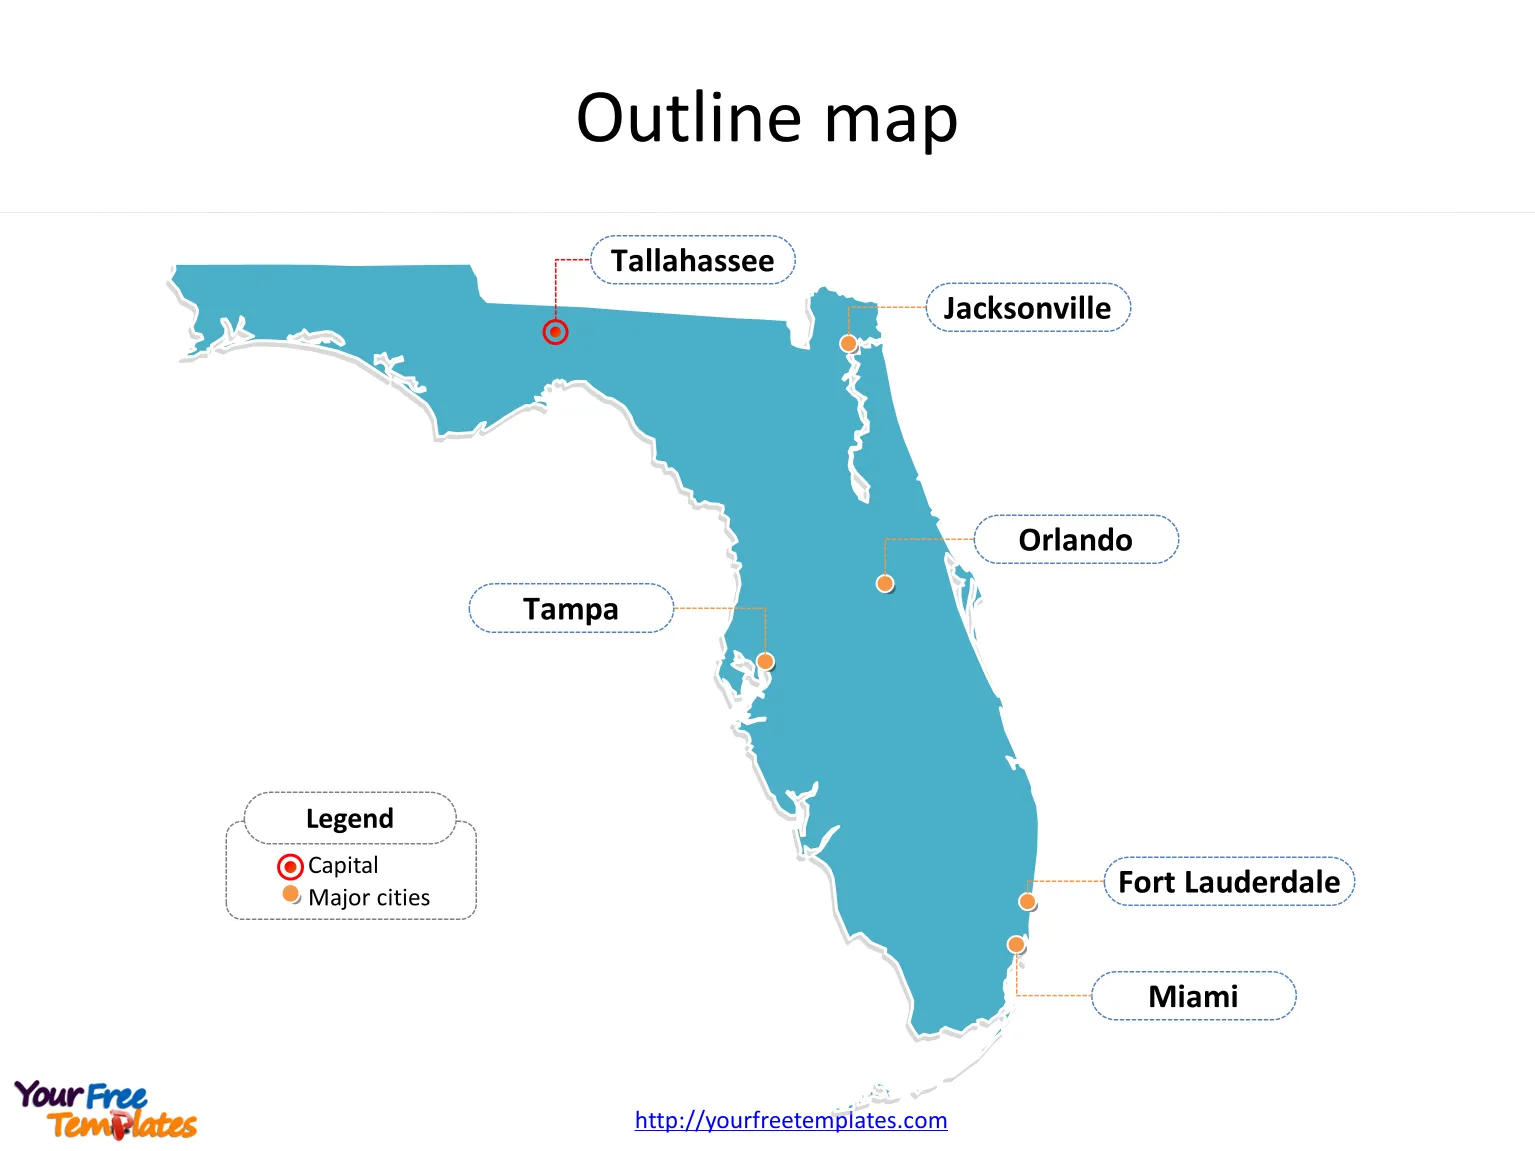 State of Florida map with outline and cities labeled on the Florida maps PowerPoint templates